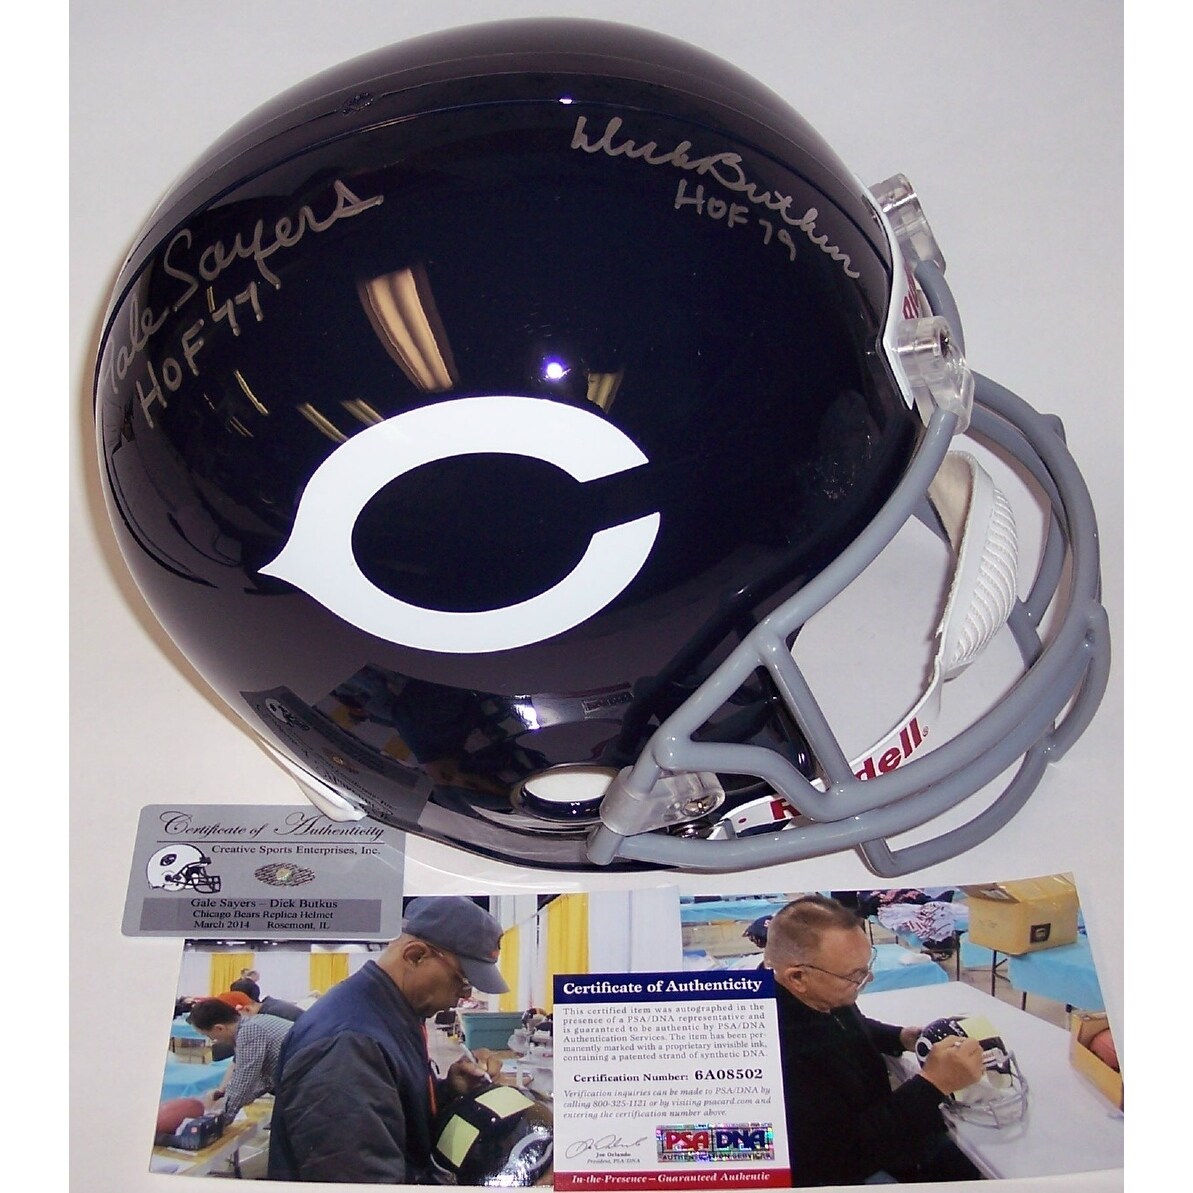 gale sayers autographed football